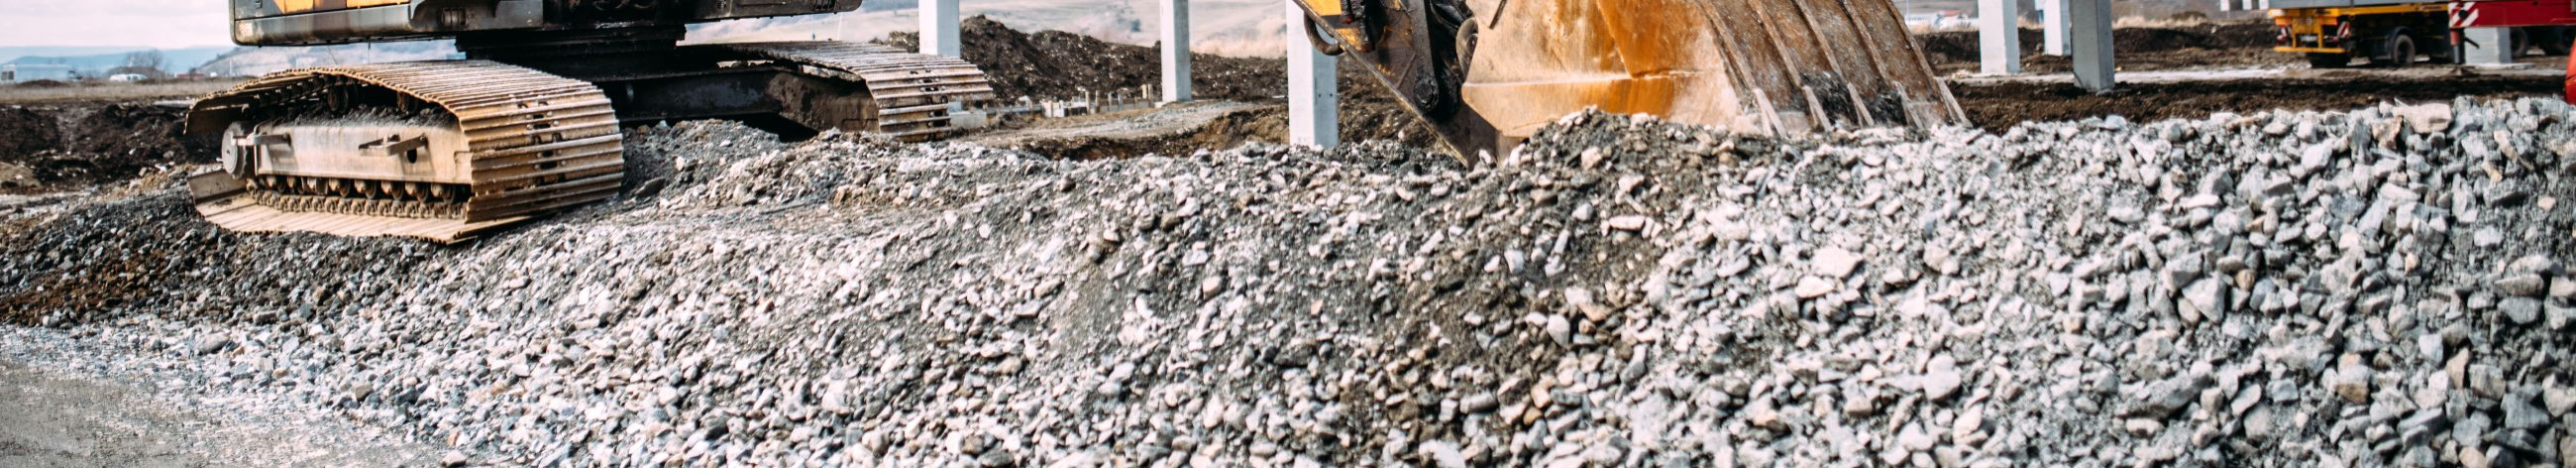 We provide top-tier excavation and soil services, including operations in sand quarries.